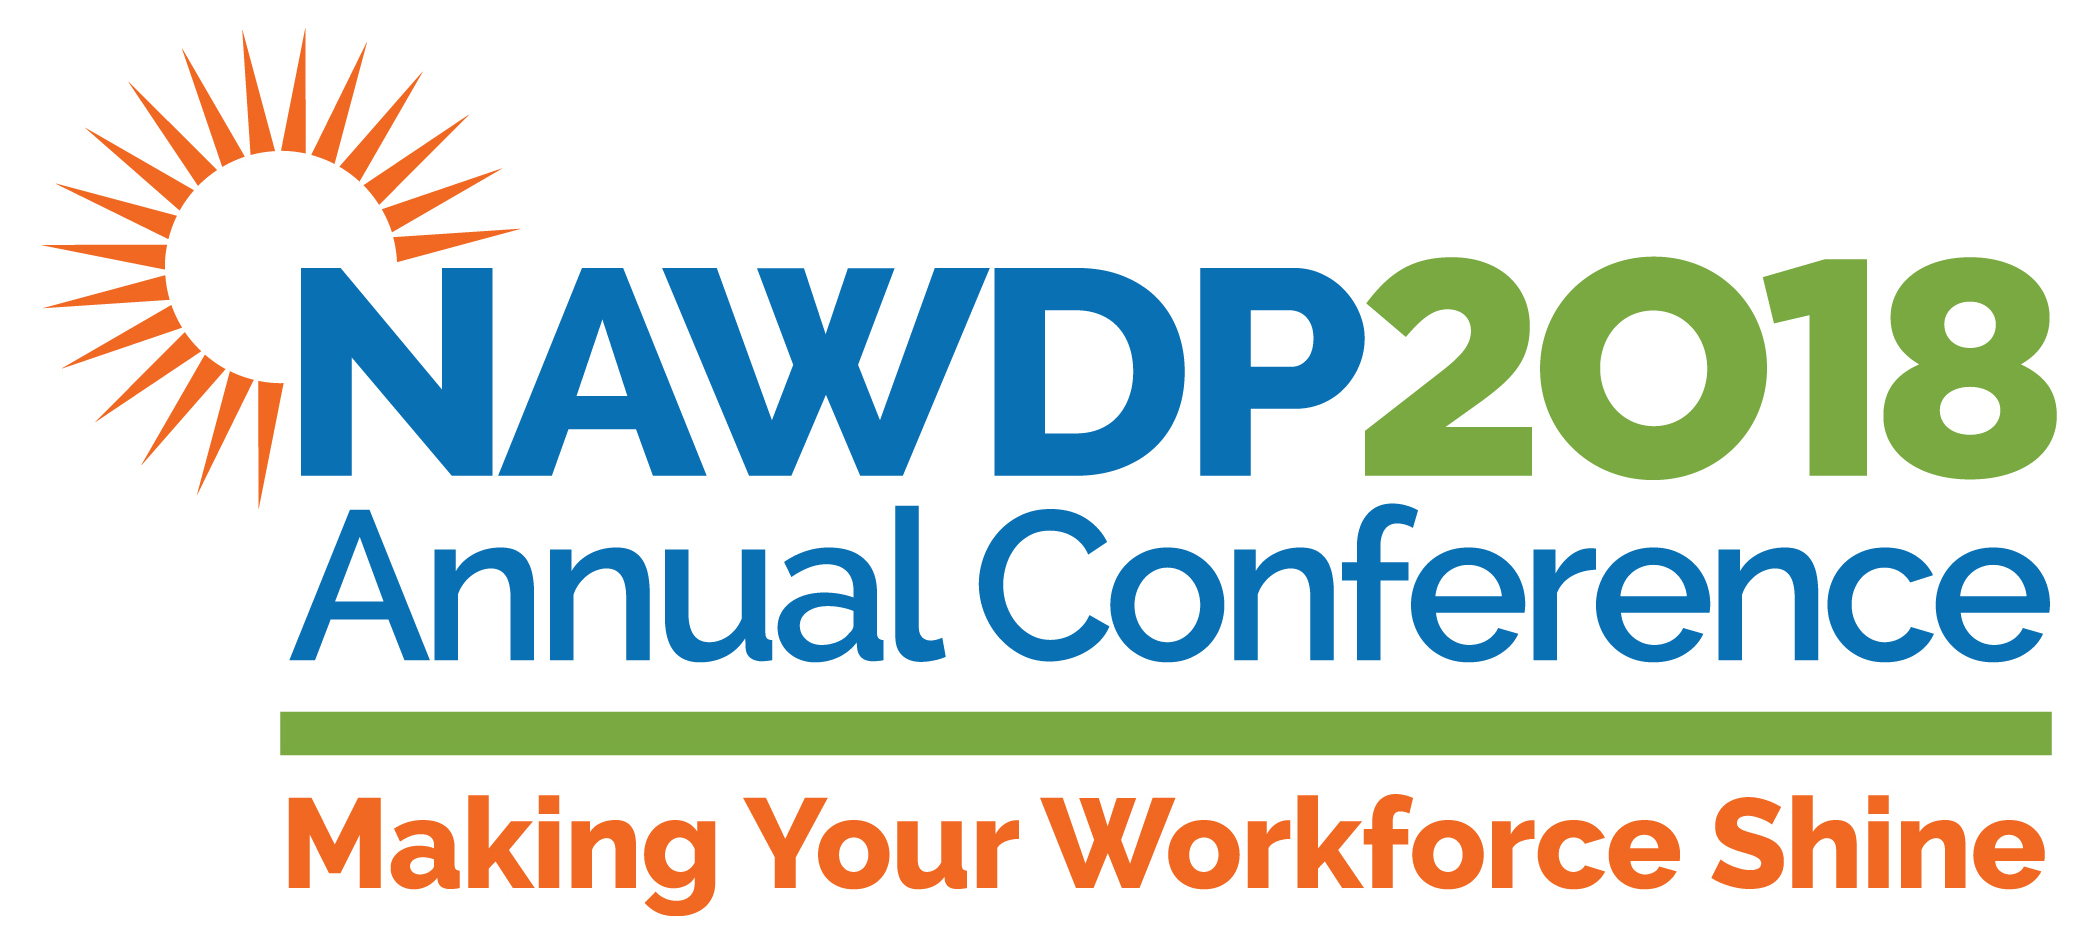 Podcast Zone for National Association of Workforce Development Professionals (NAWDP) 2018 Annual Conference